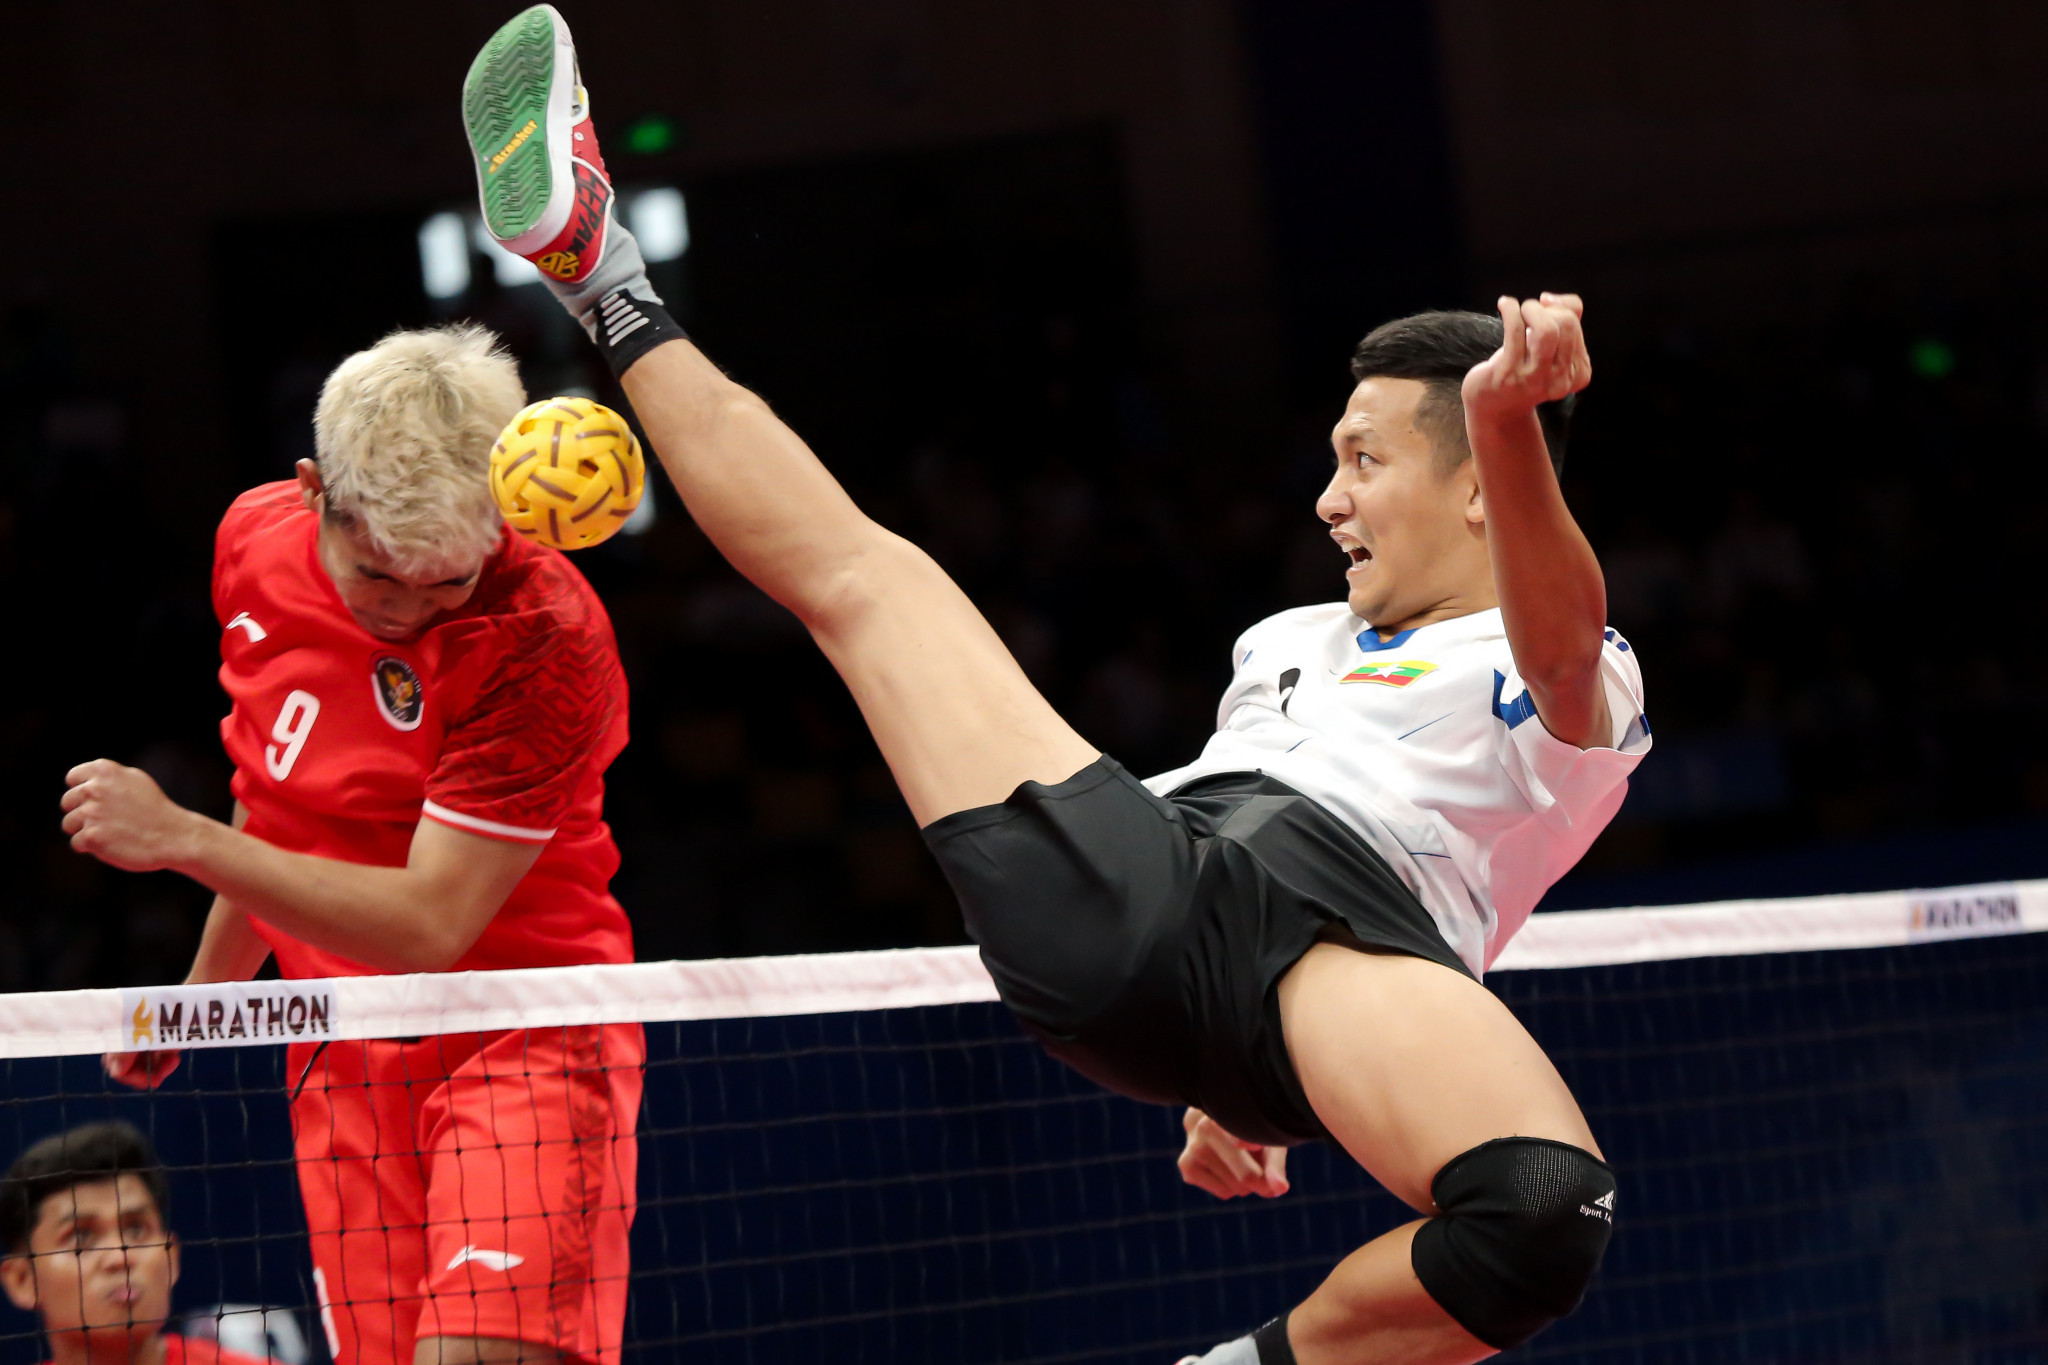 Myanmar won its first medal of Hangzhou 2022 with a gold against Indonesia in the men's quadrant sepaktakraw final ©Hangzhou 2022